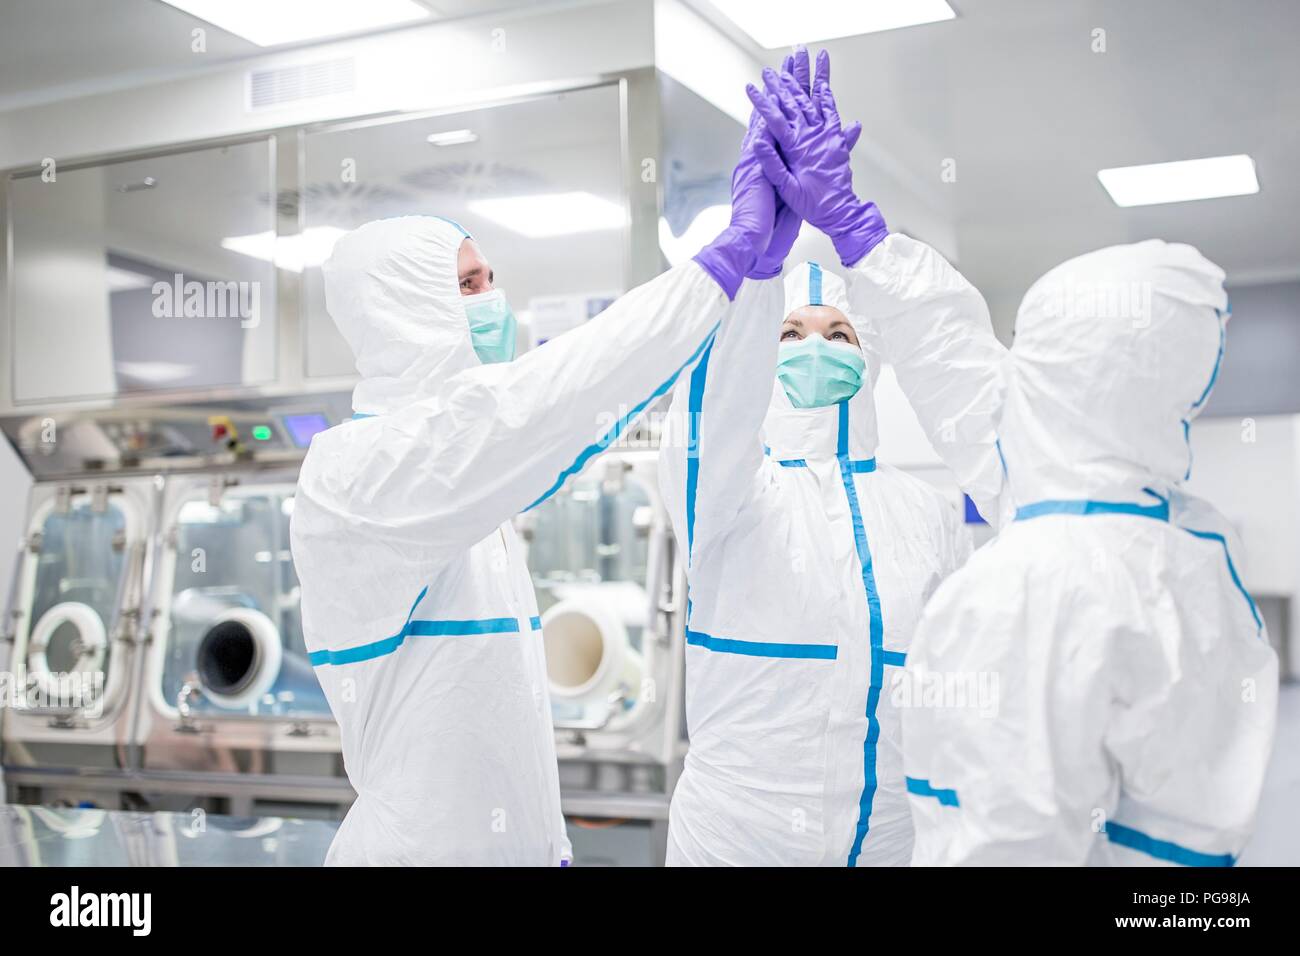 Lab technicians in a sterile environment high-fiving. Stock Photo